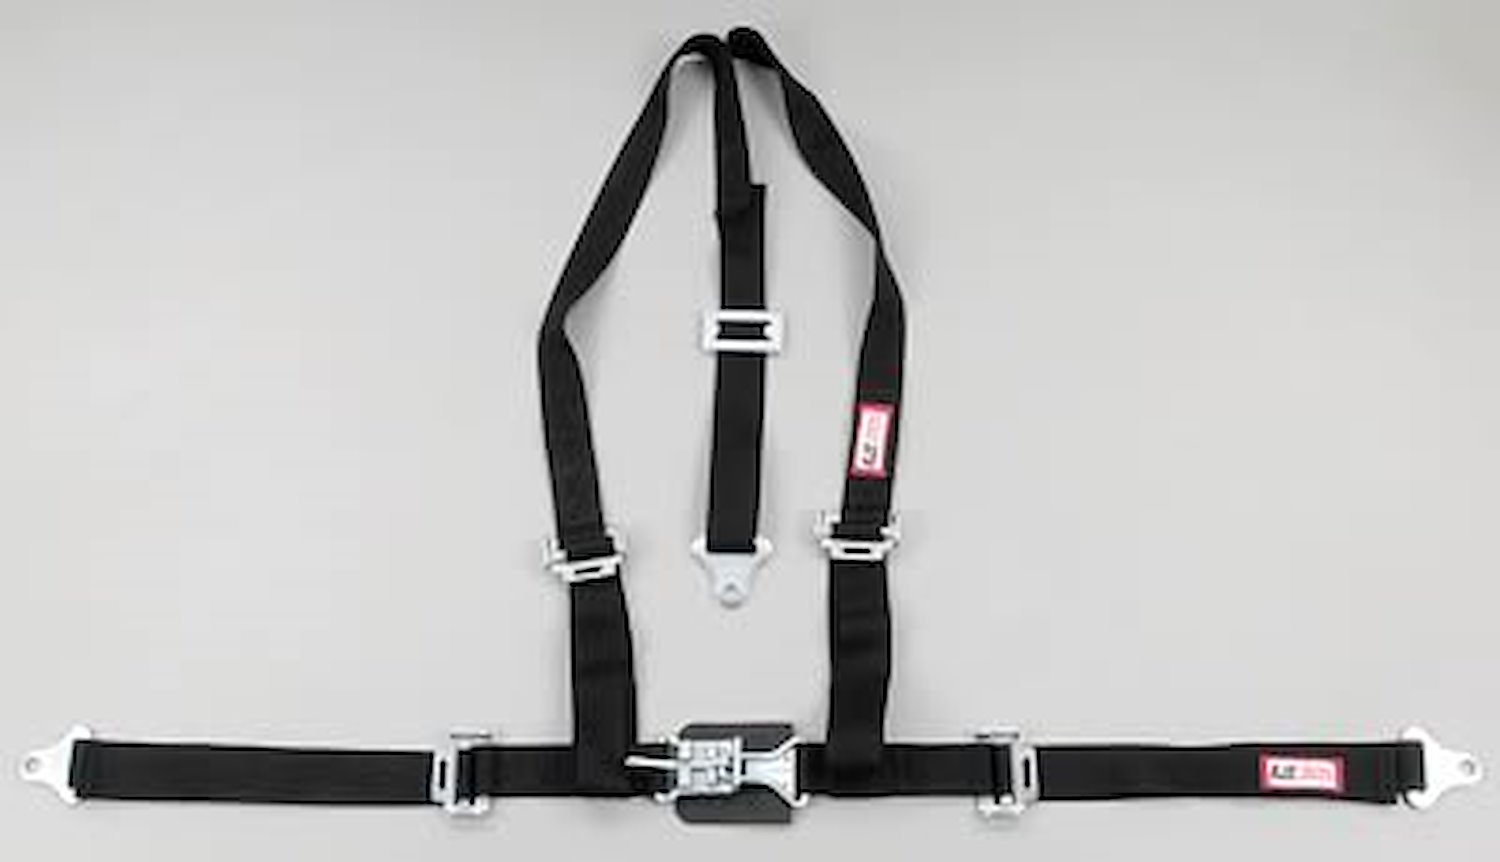 NON-SFI L&L HARNESS 3 PULL UP Lap BELT SEWN IN 2 S.H. Y FLOOR Mount ALL WRAP ENDS PURPLE